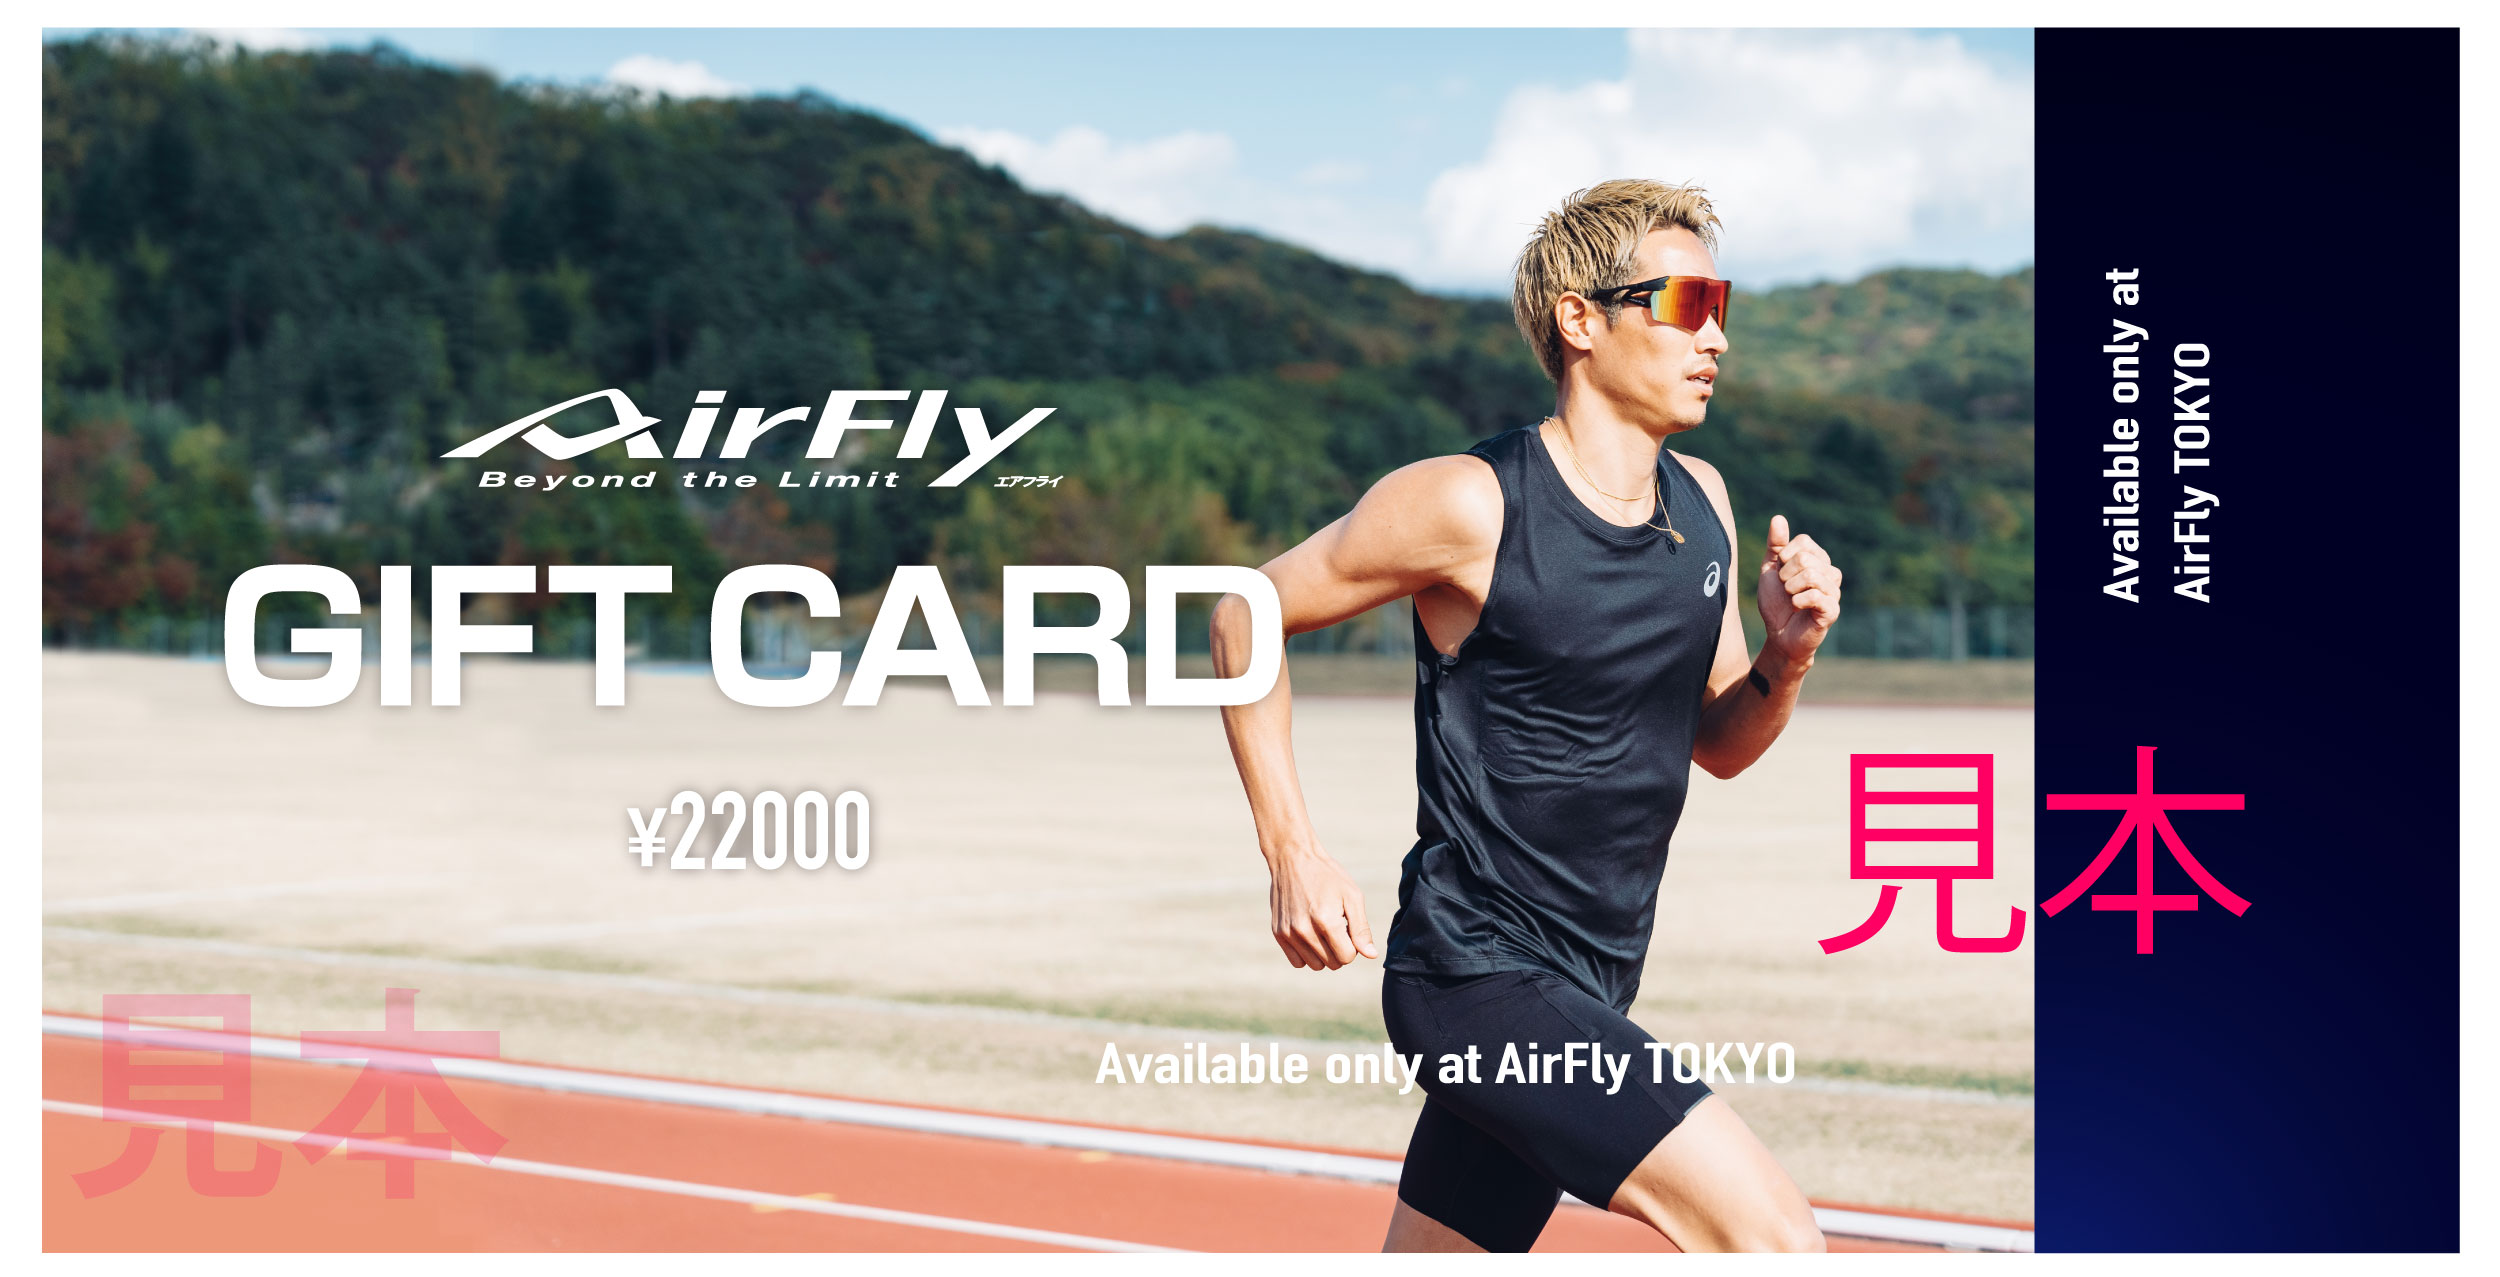 GIFT CARD 22000 AirFly